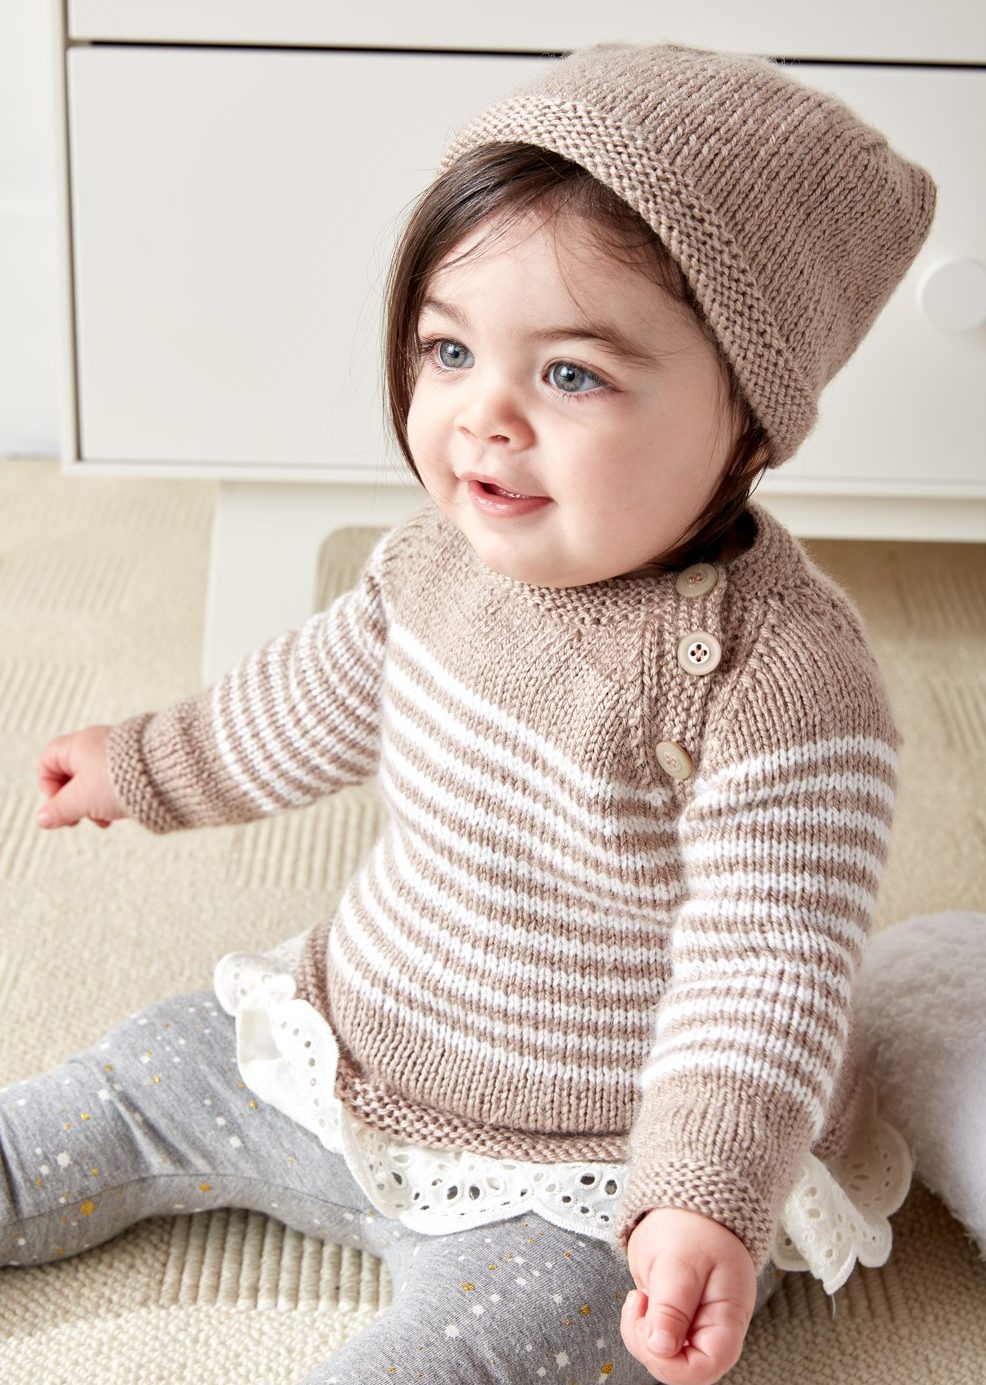 knitting patterns for babies free knitting pattern for easy wee stripes baby sweater and hat tzjewpg